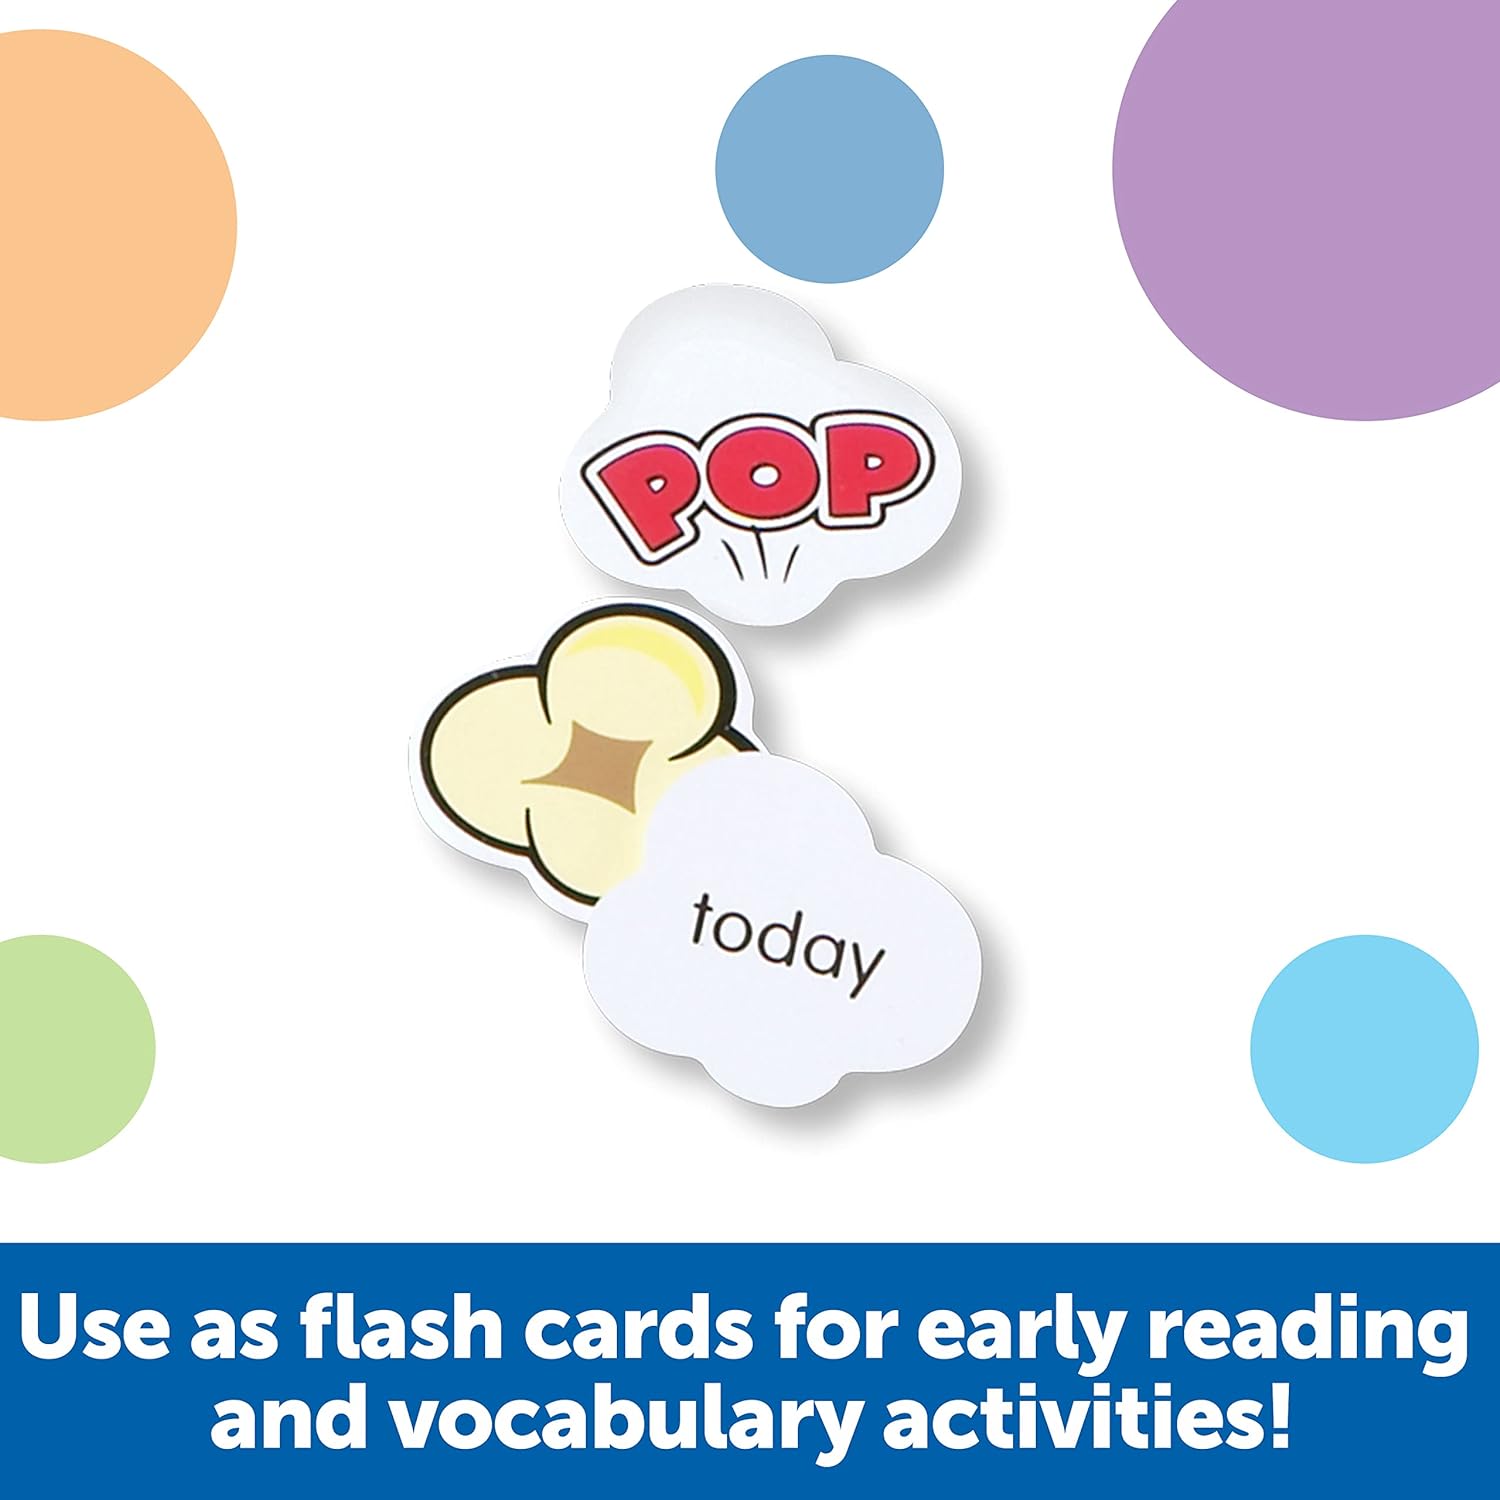 Learning Resources Pop For Sight Words Game,Vocabulary/Literacy Game, 92 Cards, Ages 5+